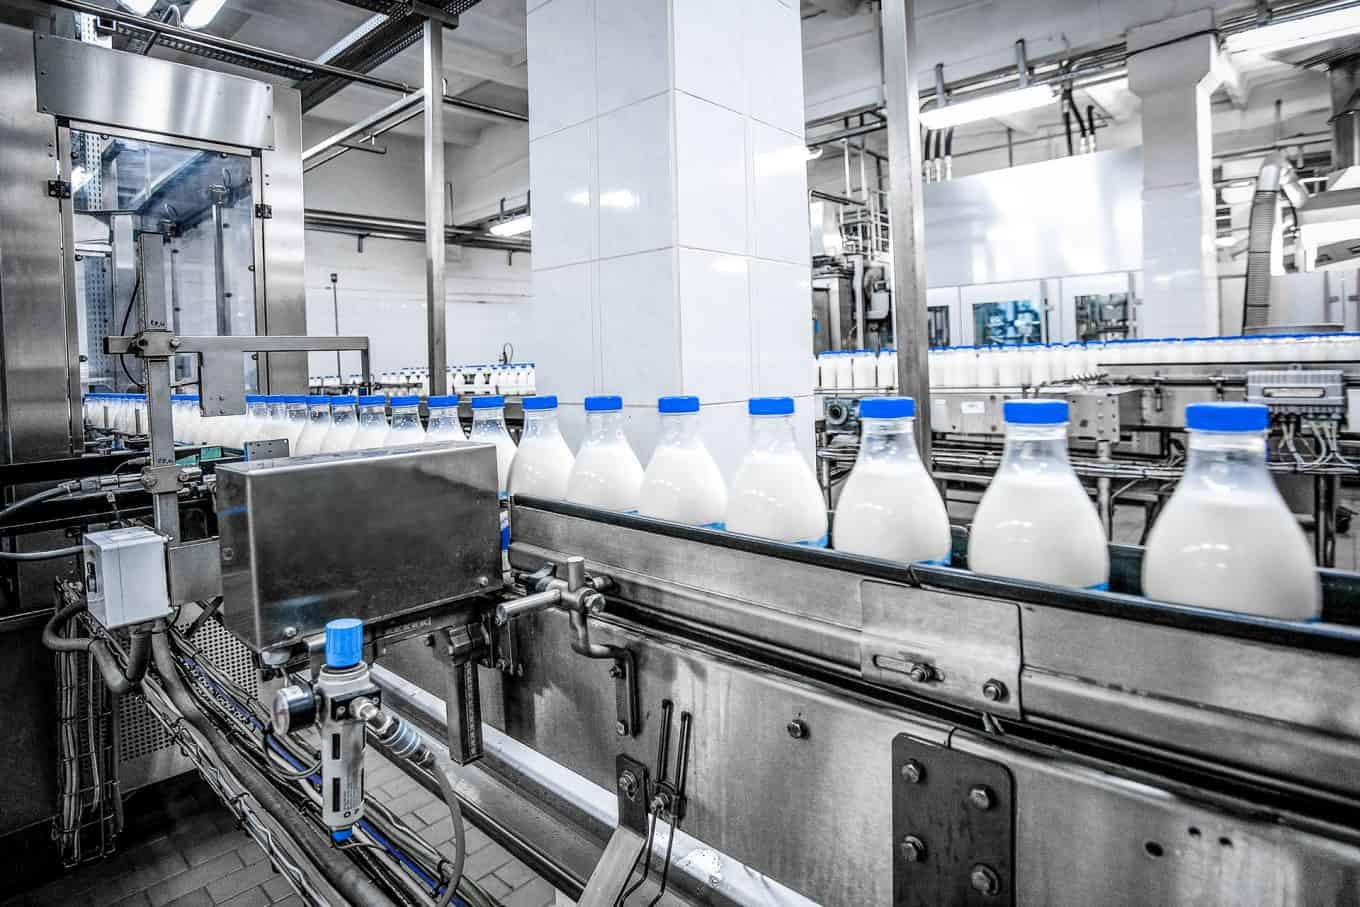 Ozone treatment in dairy industry